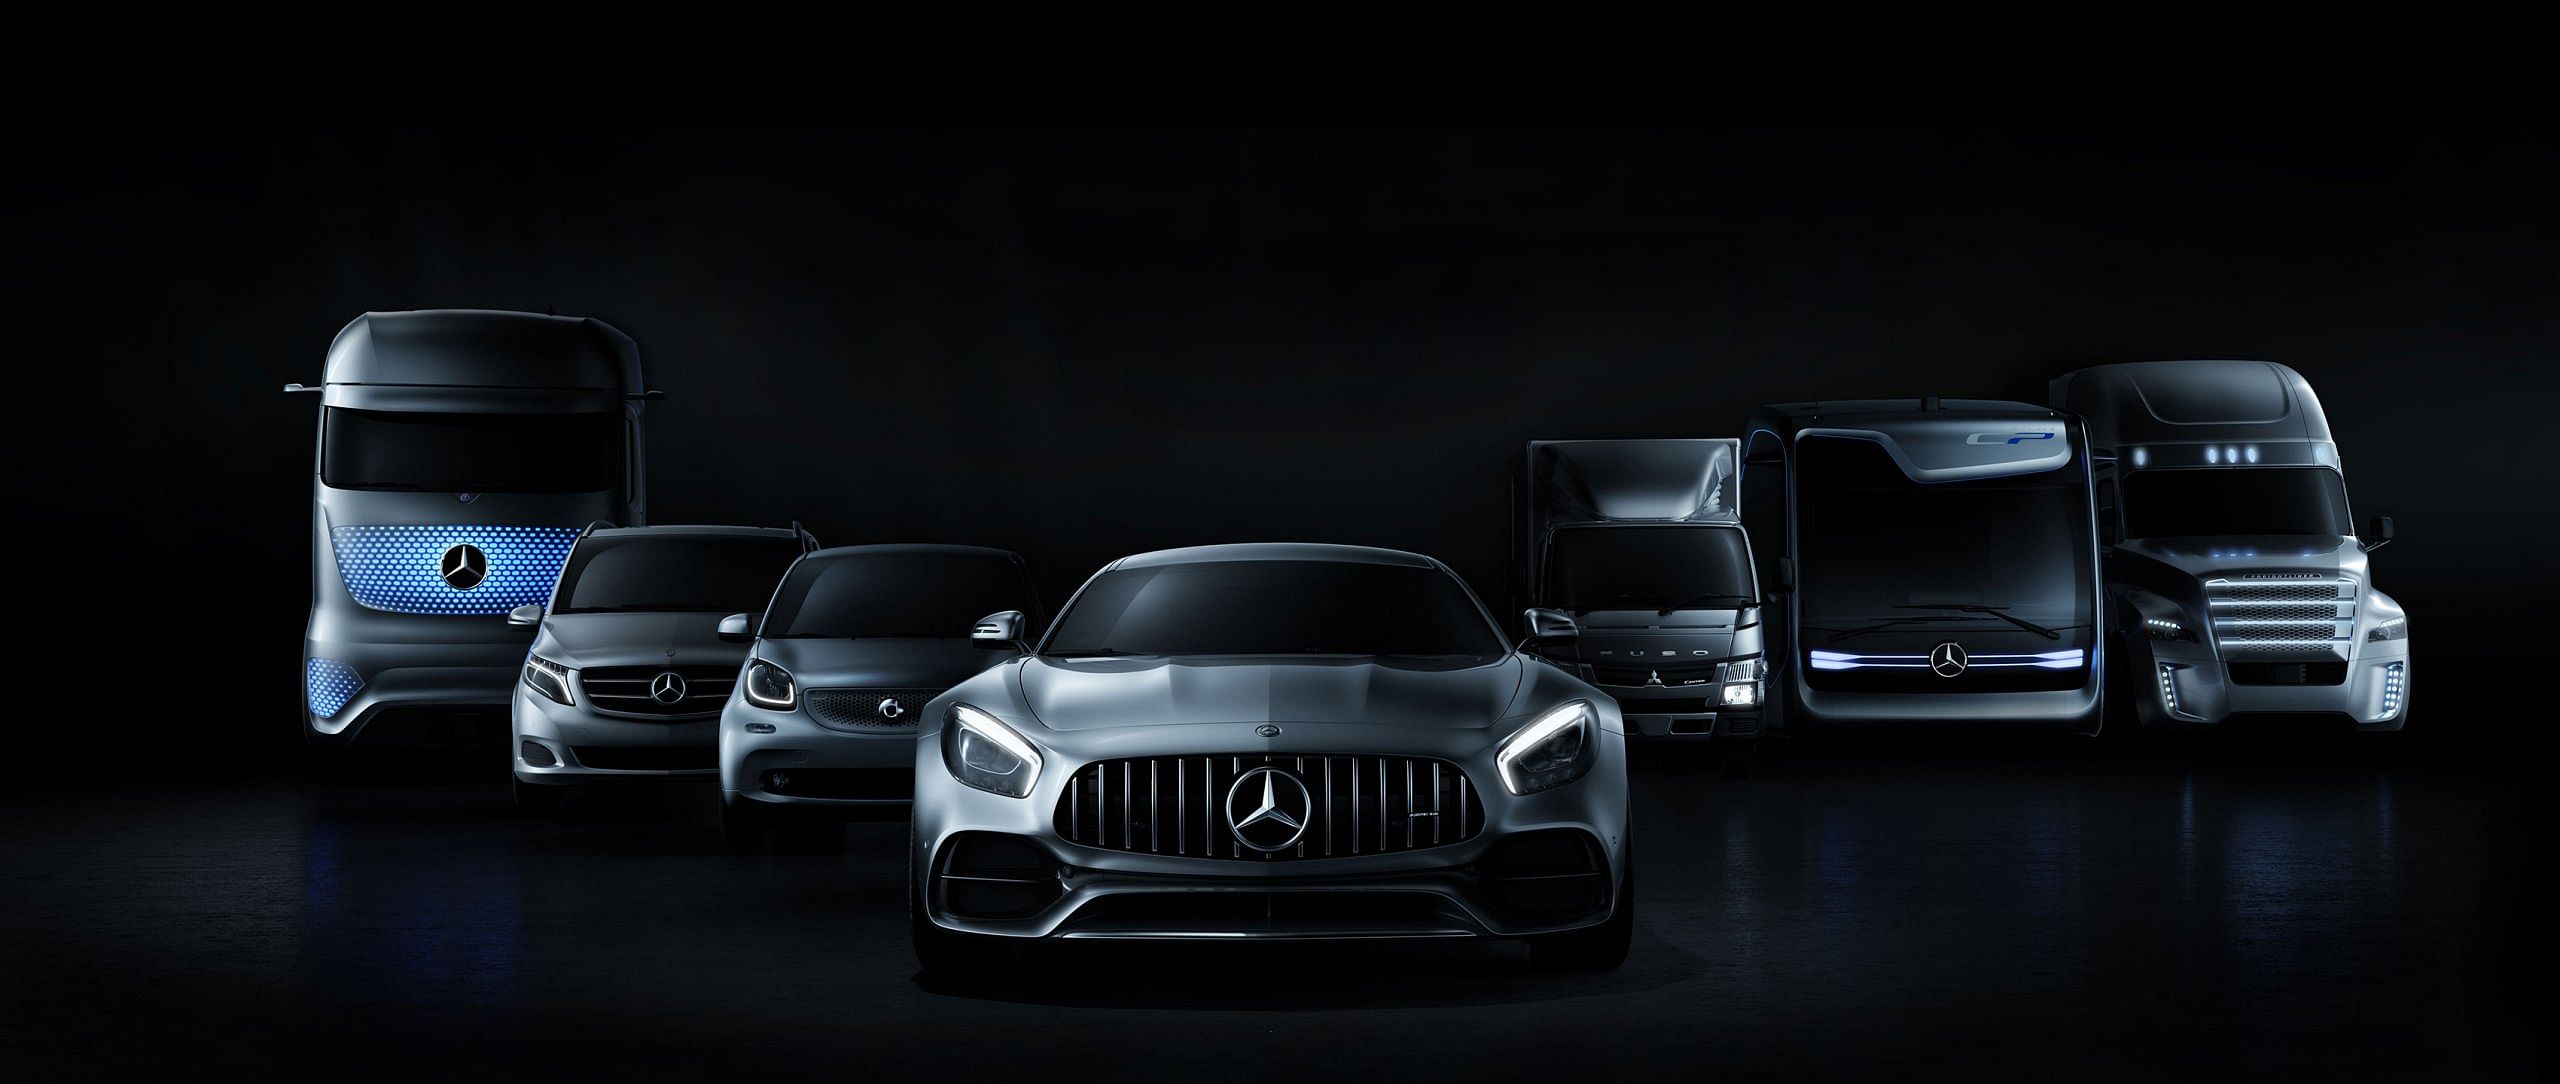 Premiere Express Prime enables complete servicing of a Mercedes Benz in three hours. Photo/mercedes-benz.com